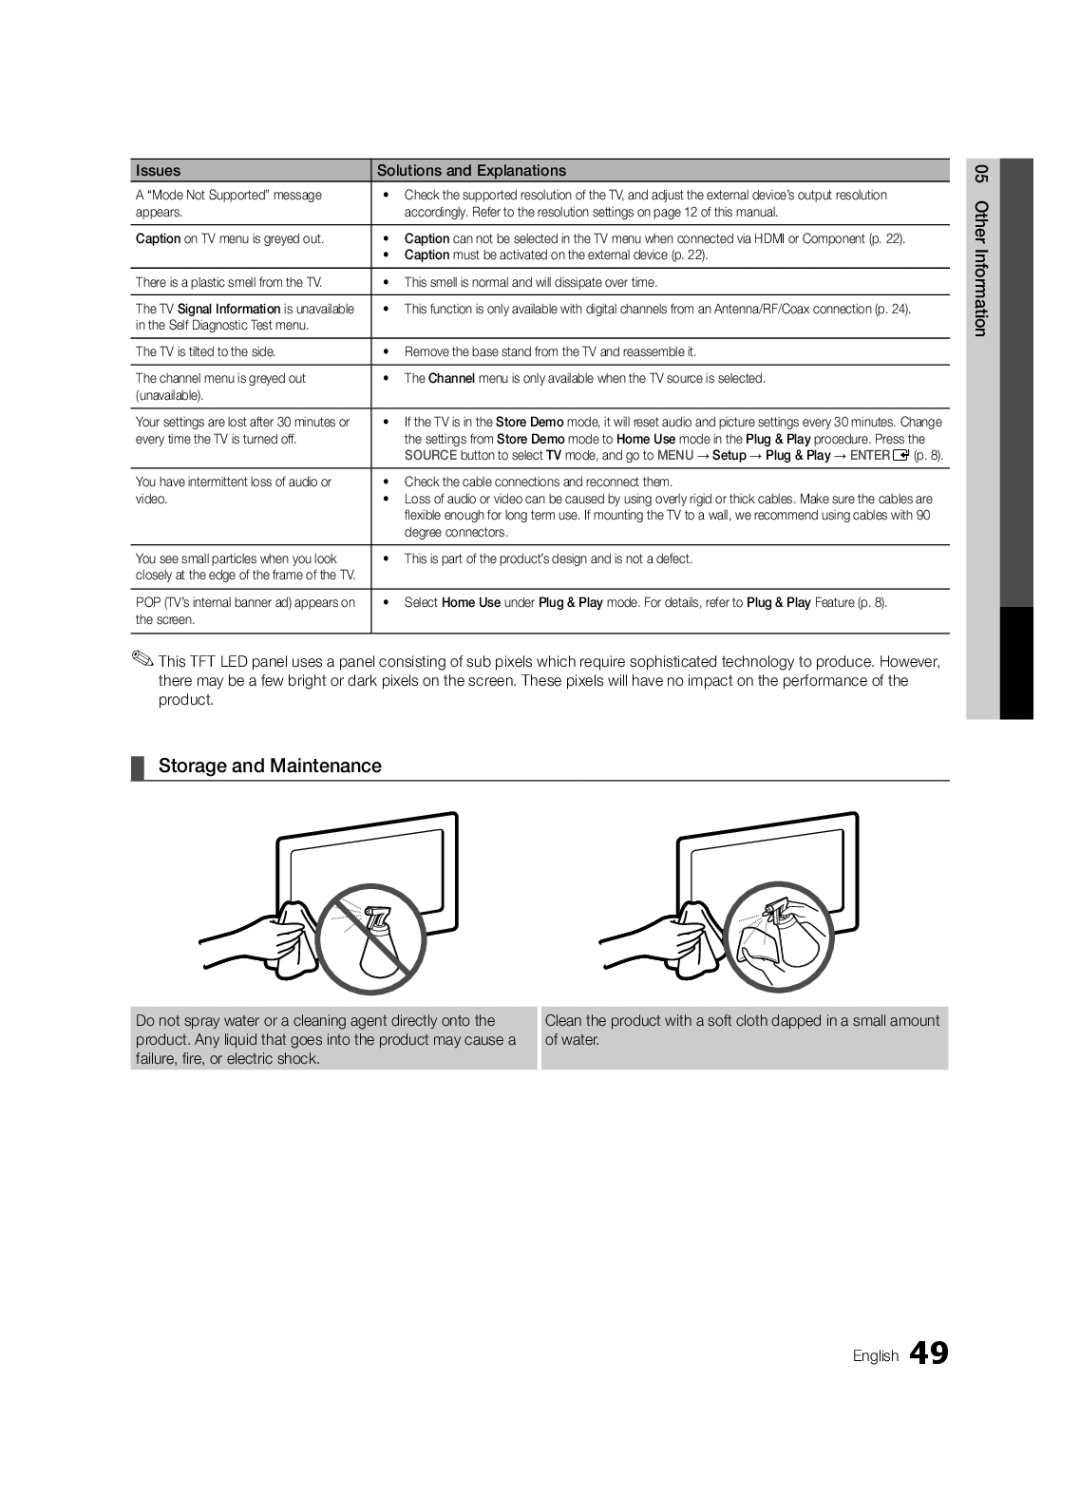 Samsung UC5000 user manual Storage and Maintenance, Caption must be activated on the external device p, Degree connectors 